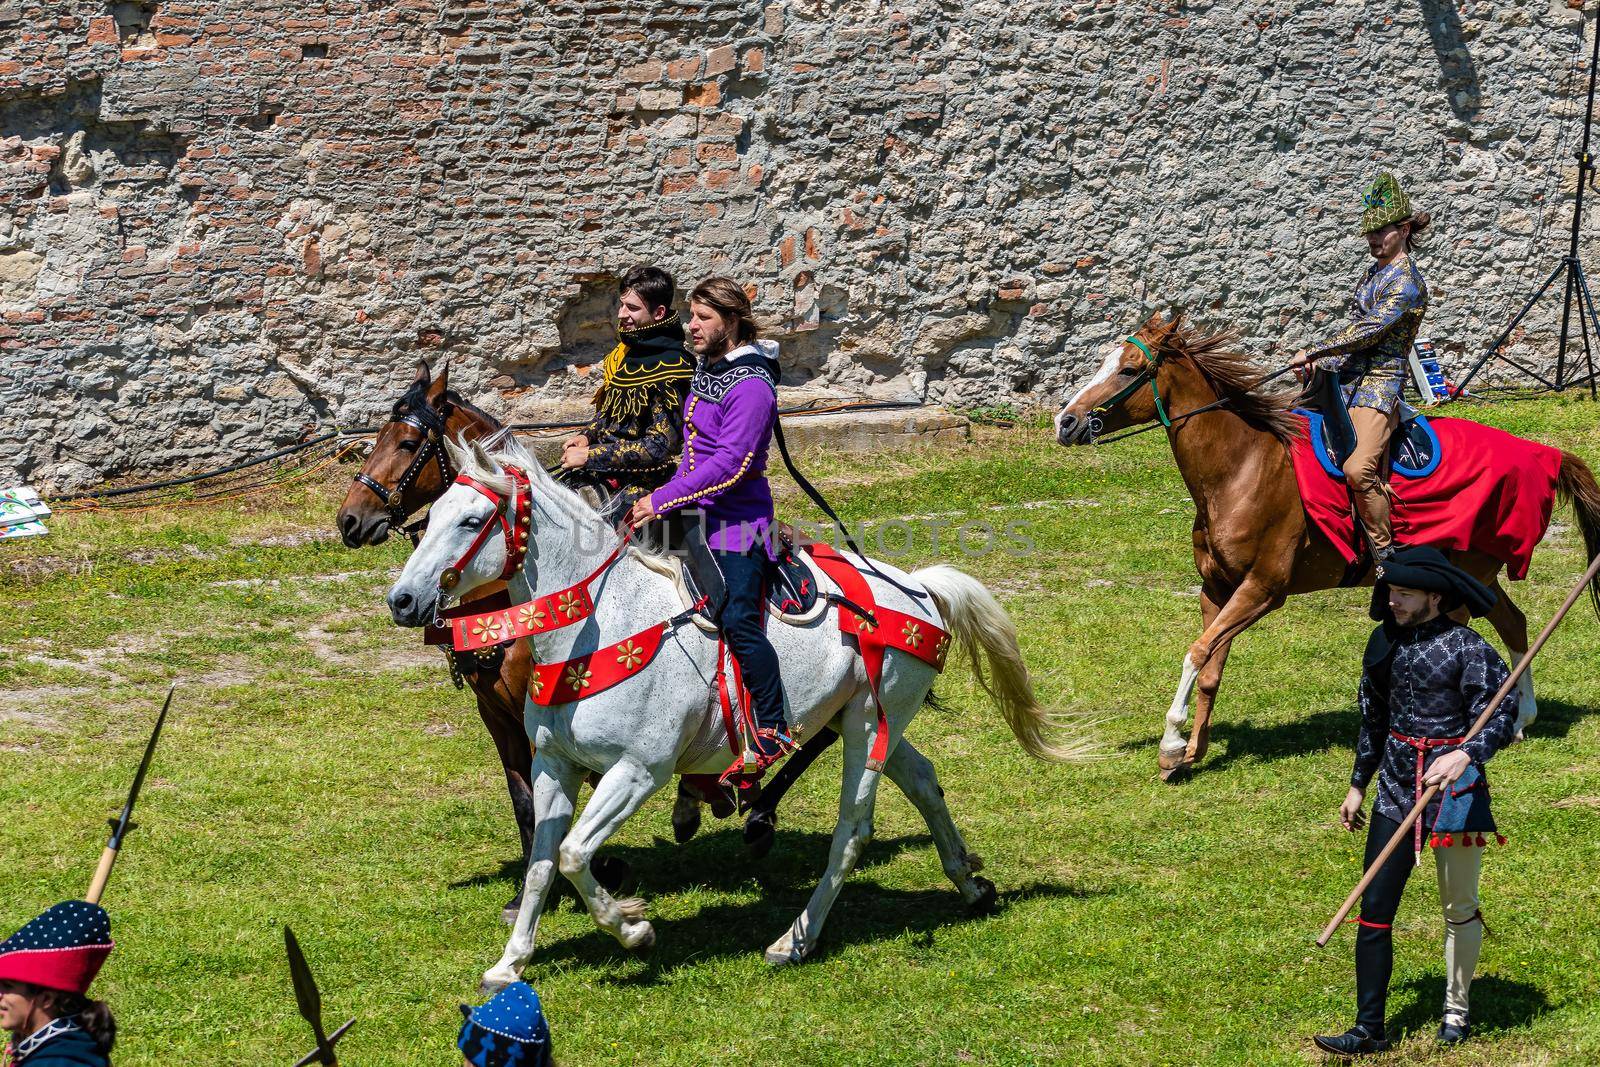 defile of knights in costumes on horseback by rostik924